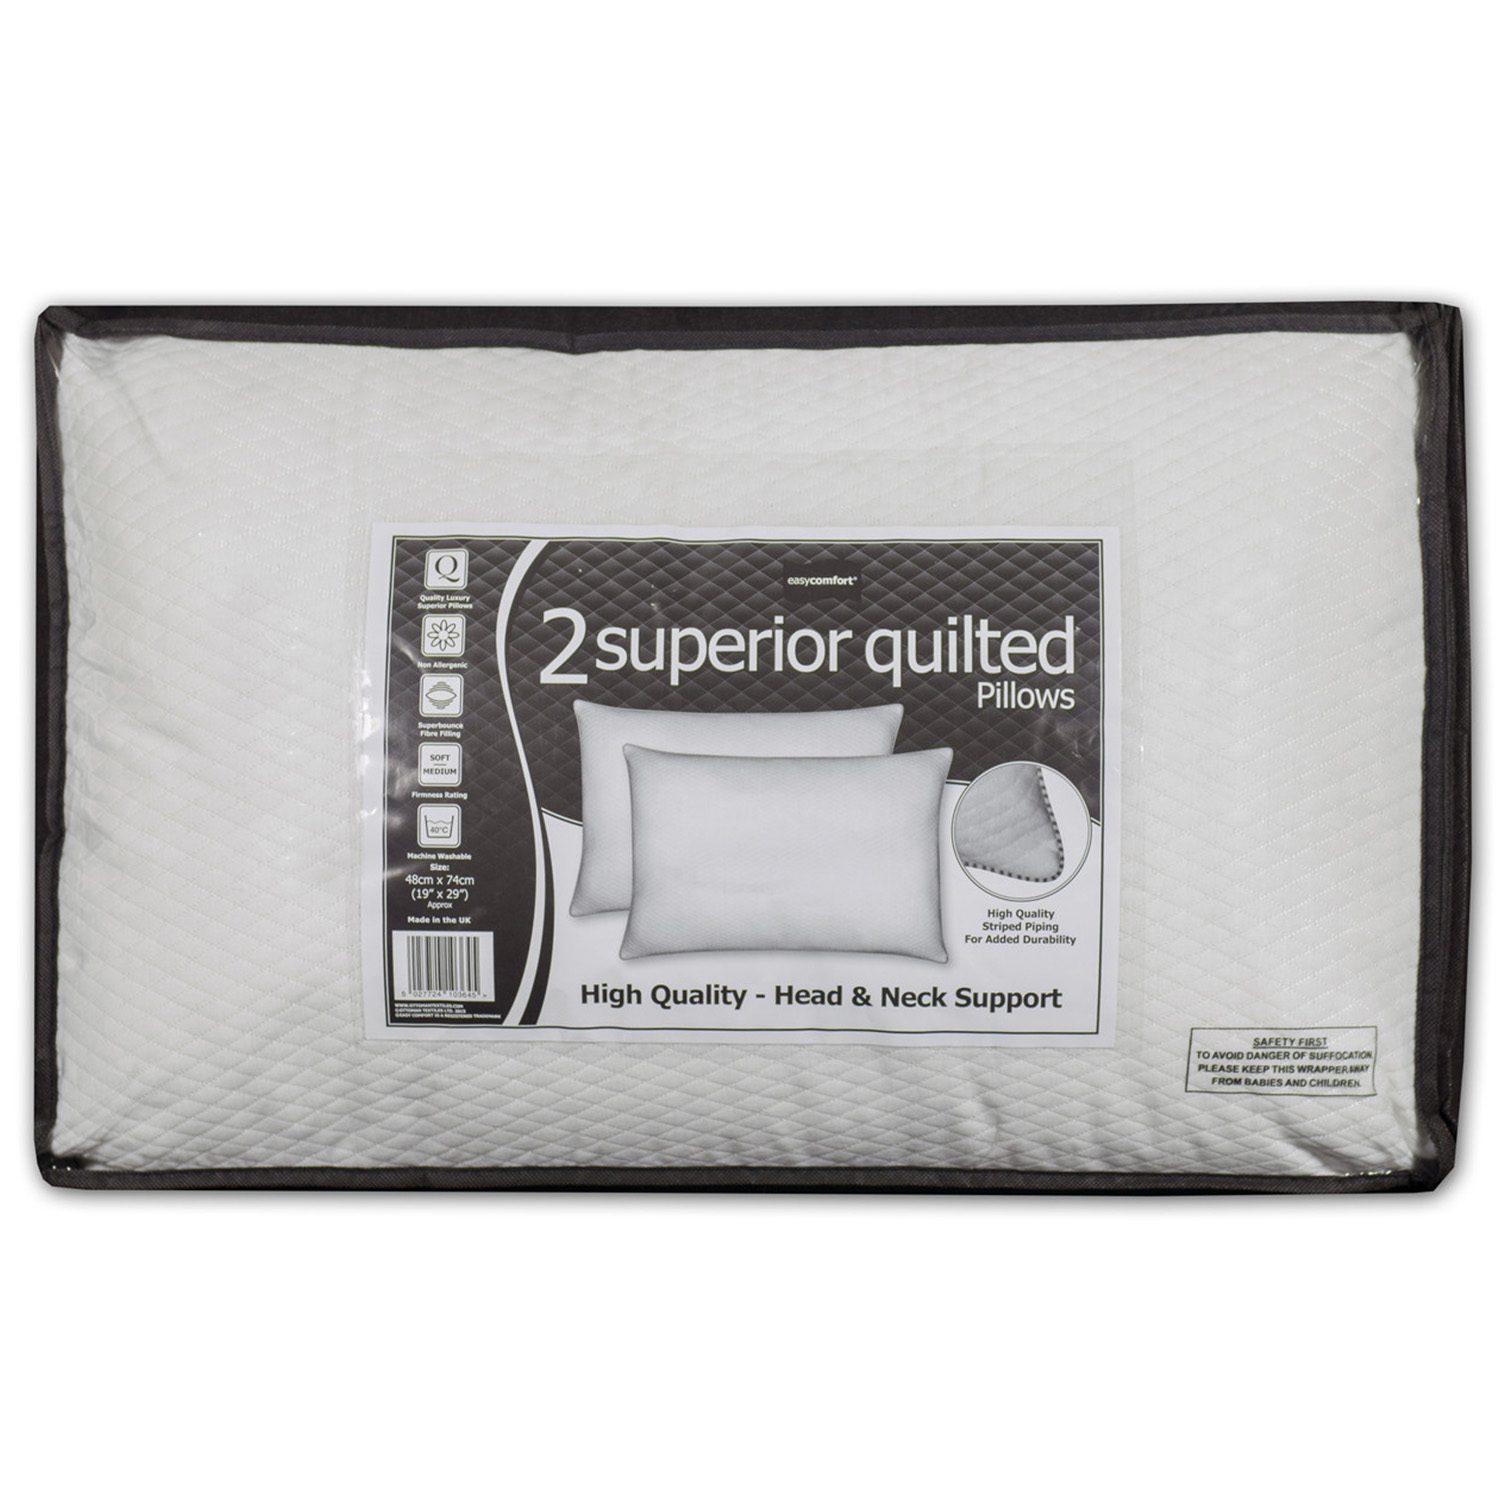 Easycomfort White Superior Quilted Jacquard Pillow 2 Pack Image